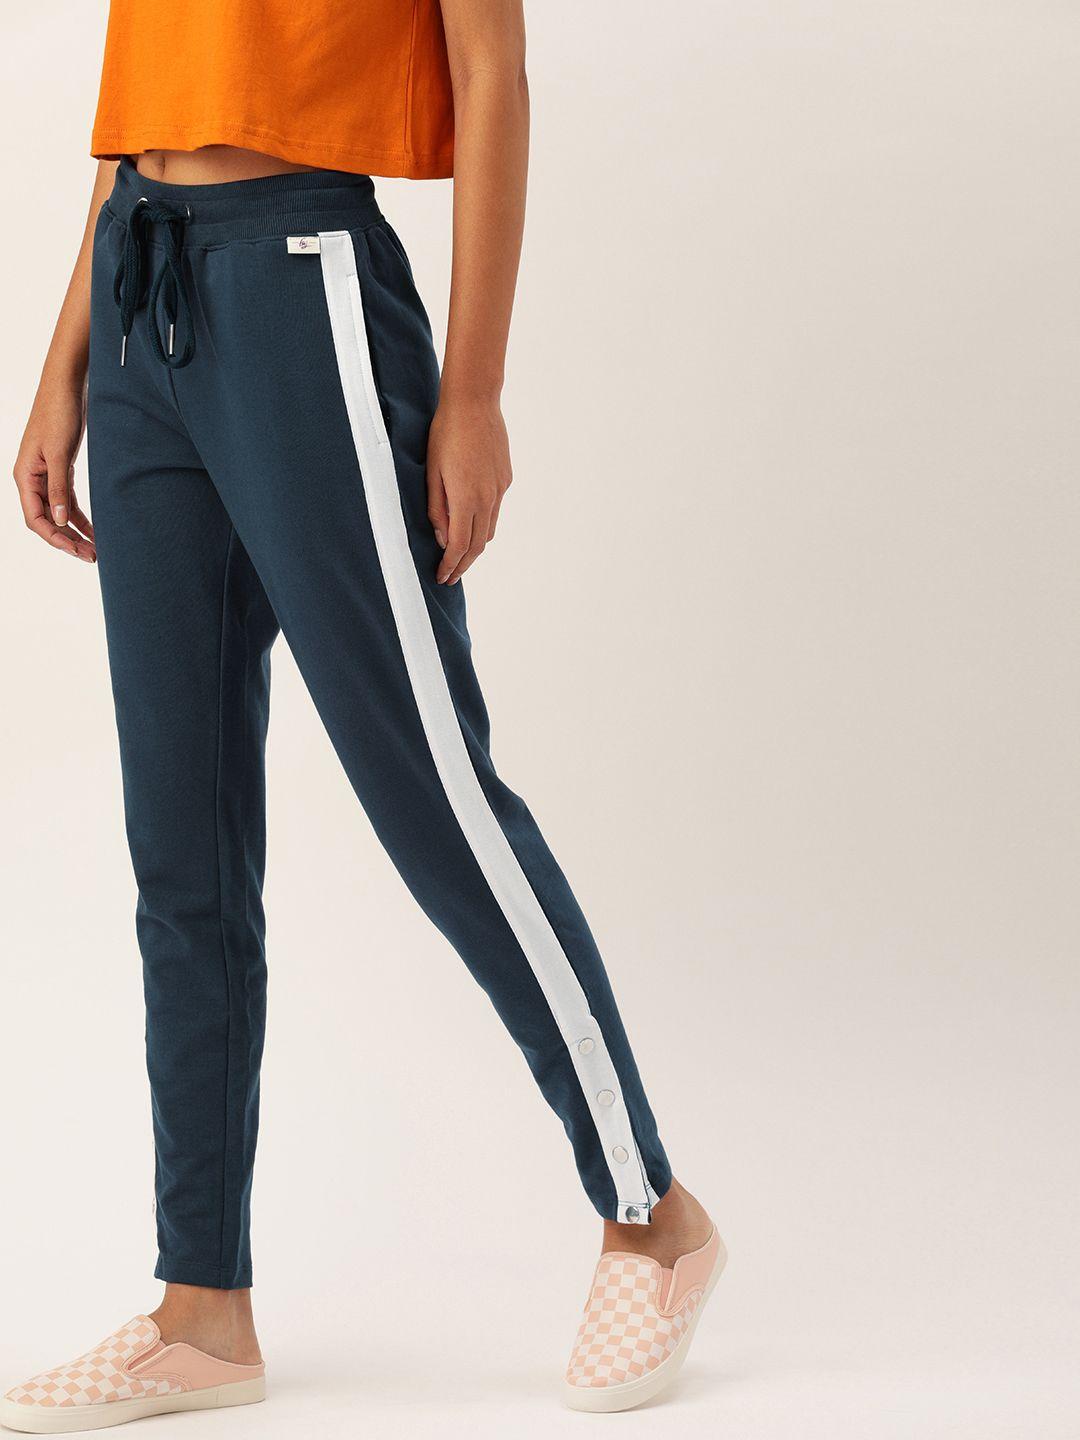 flying-machine-women-navy-blue-solid-track-pants-with-side-stripe-detail